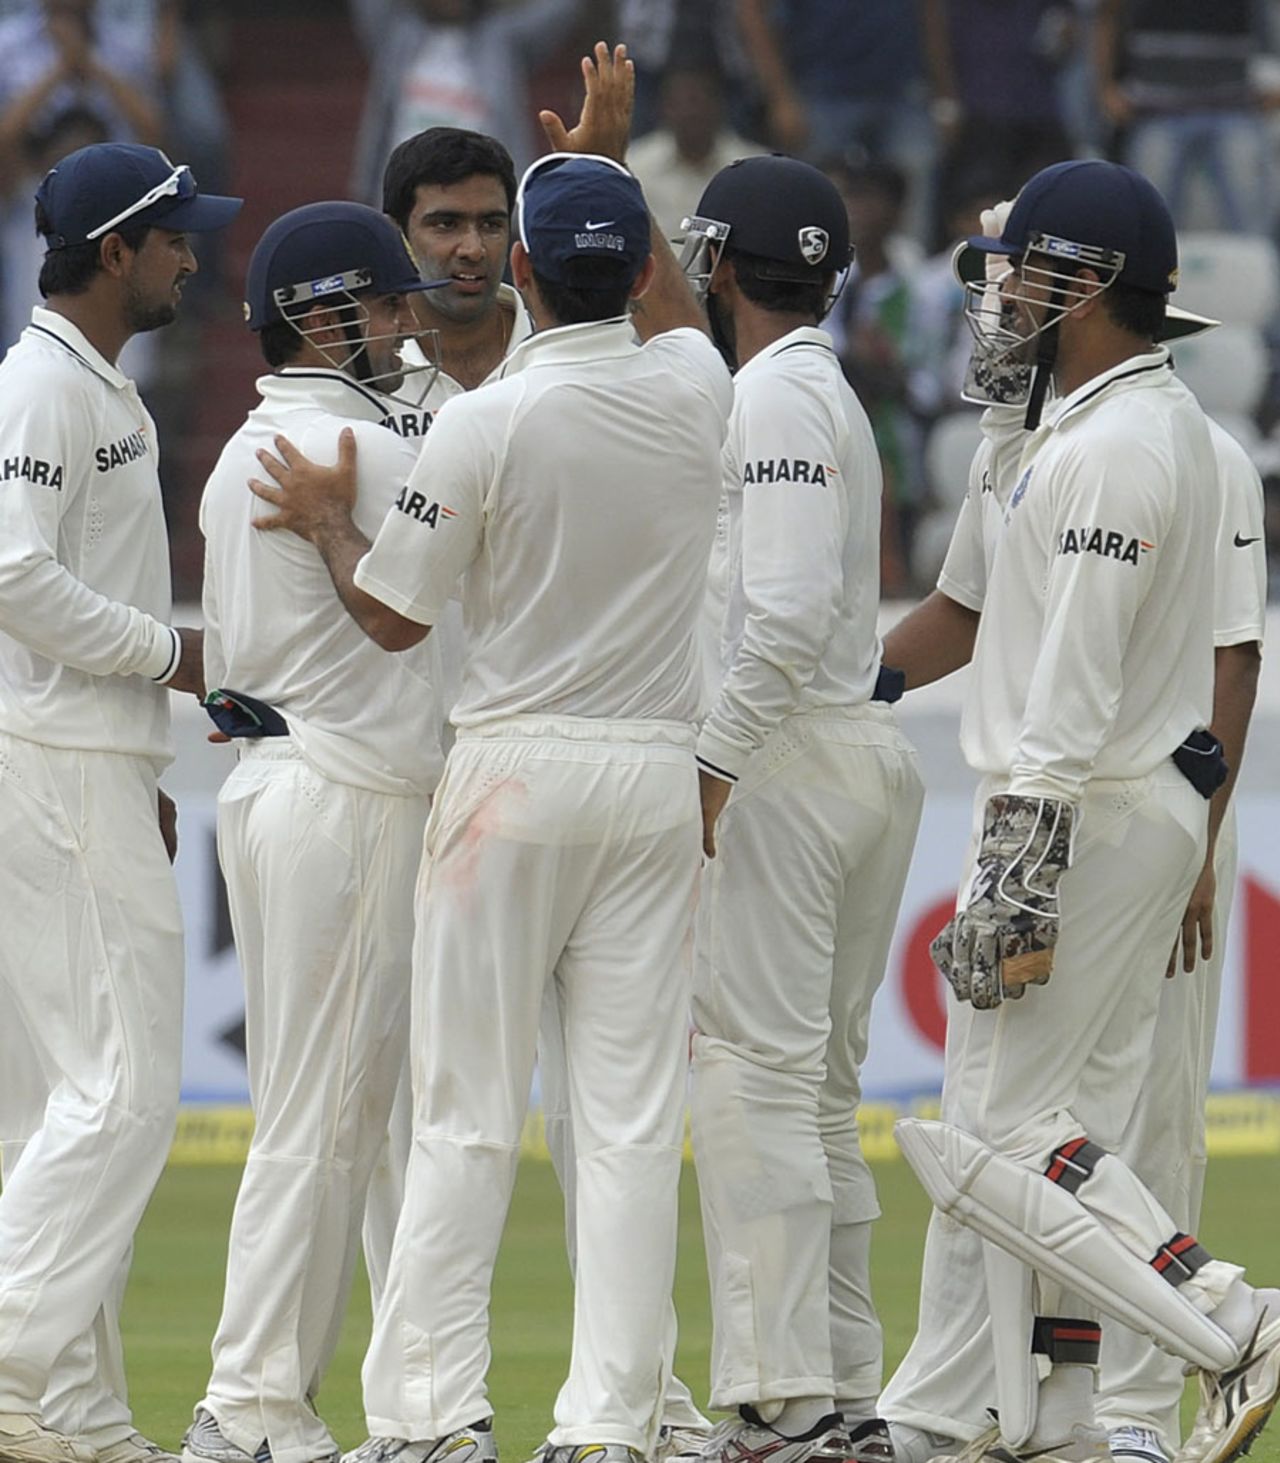 Indians celebrates Kruger van Wyk's wicket, India v New Zealand, 1st Test, Hyderabad, 3rd day, August 25, 2012